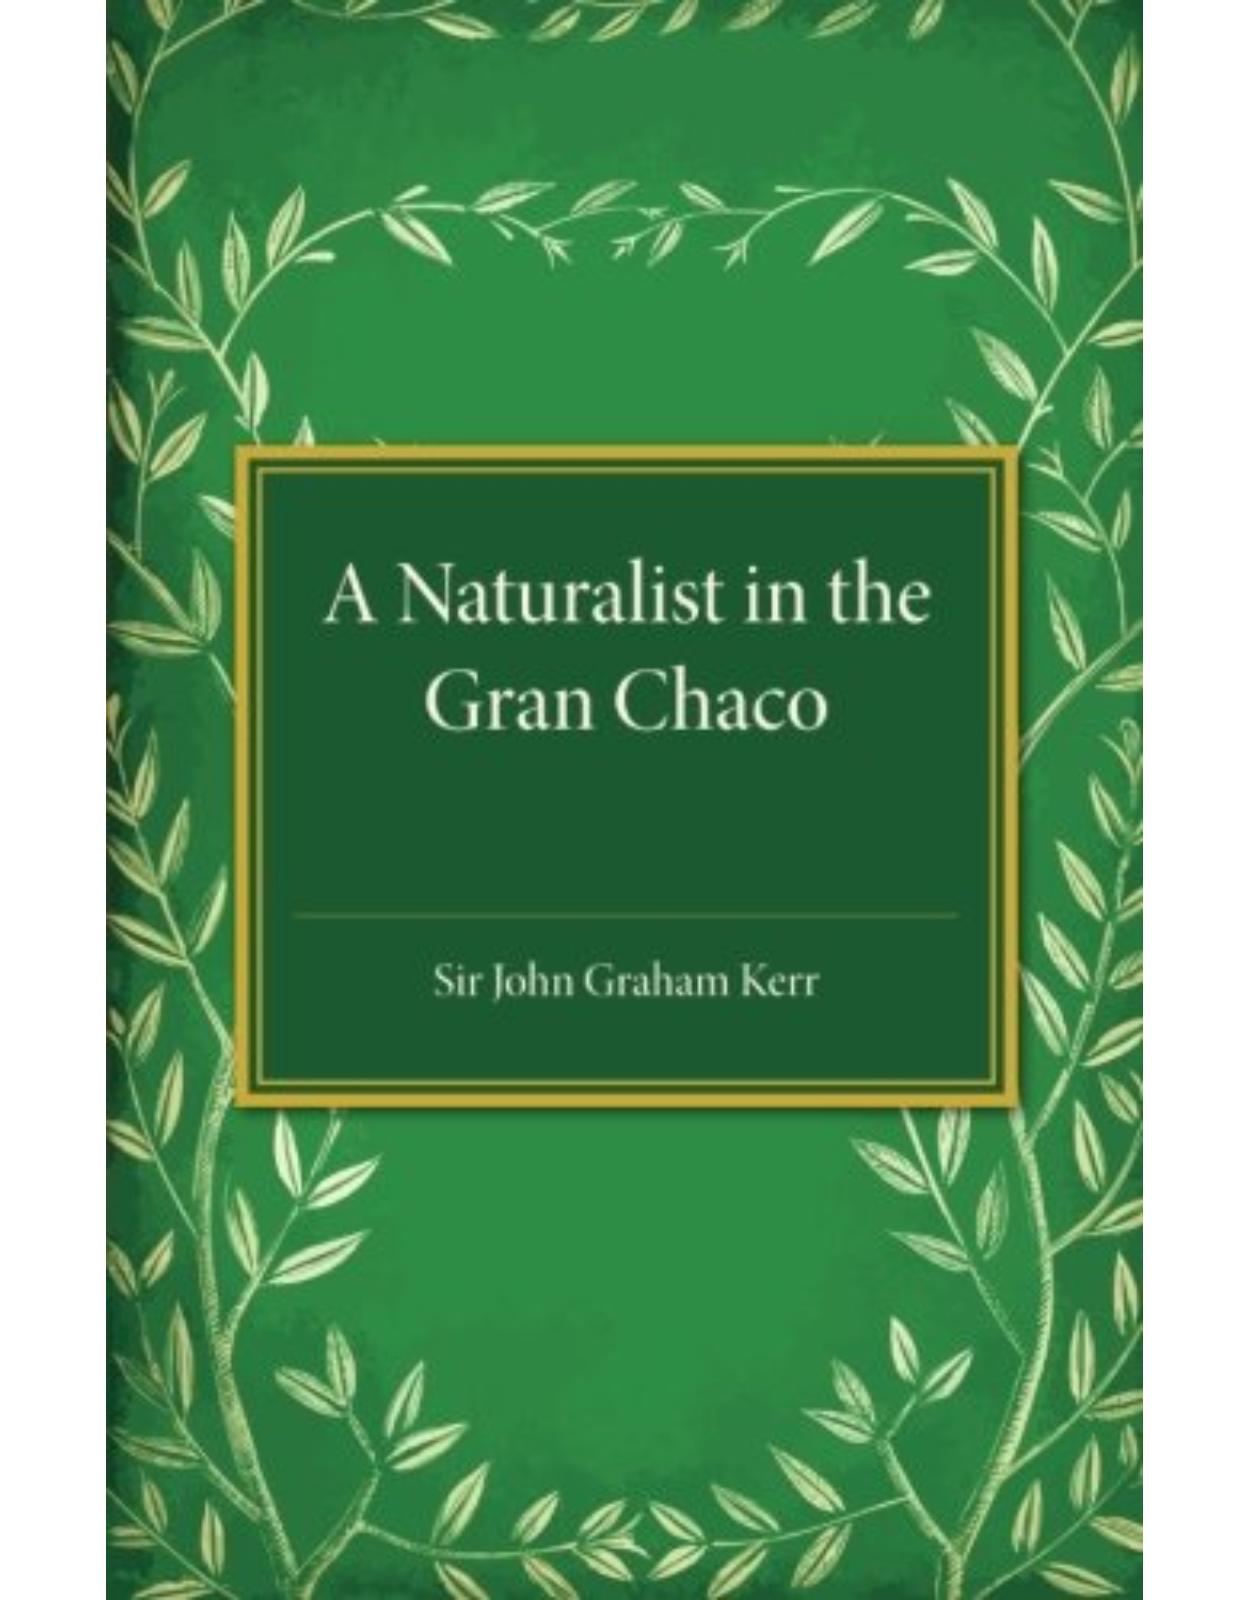 A Naturalist in the Gran Chaco